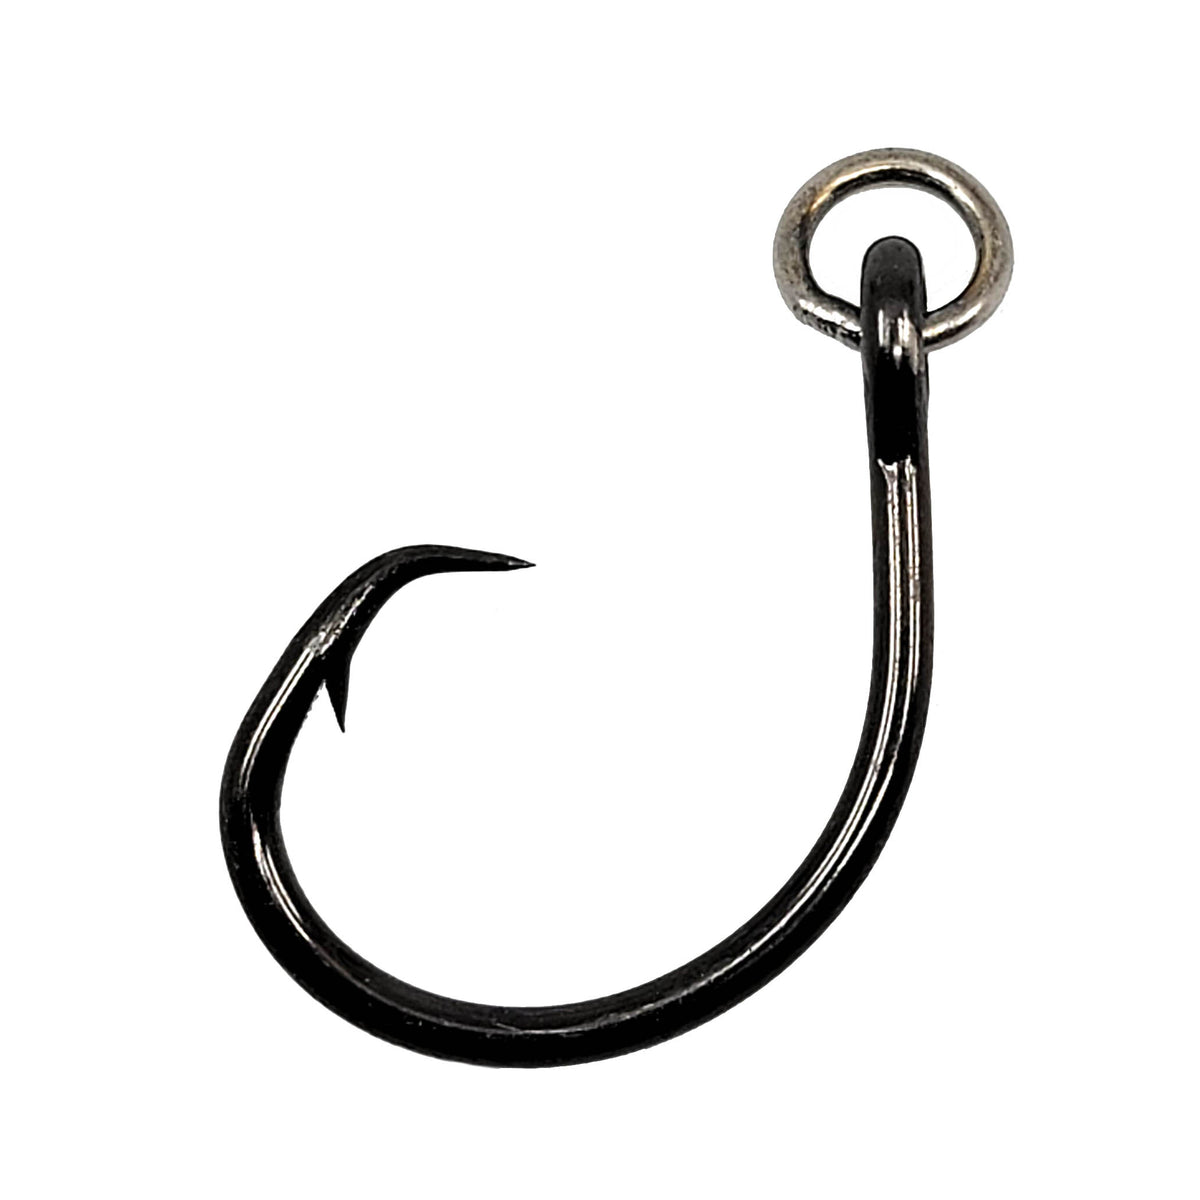 Mustad Ringed Demon Offset Circle 4X Strong - 4/0